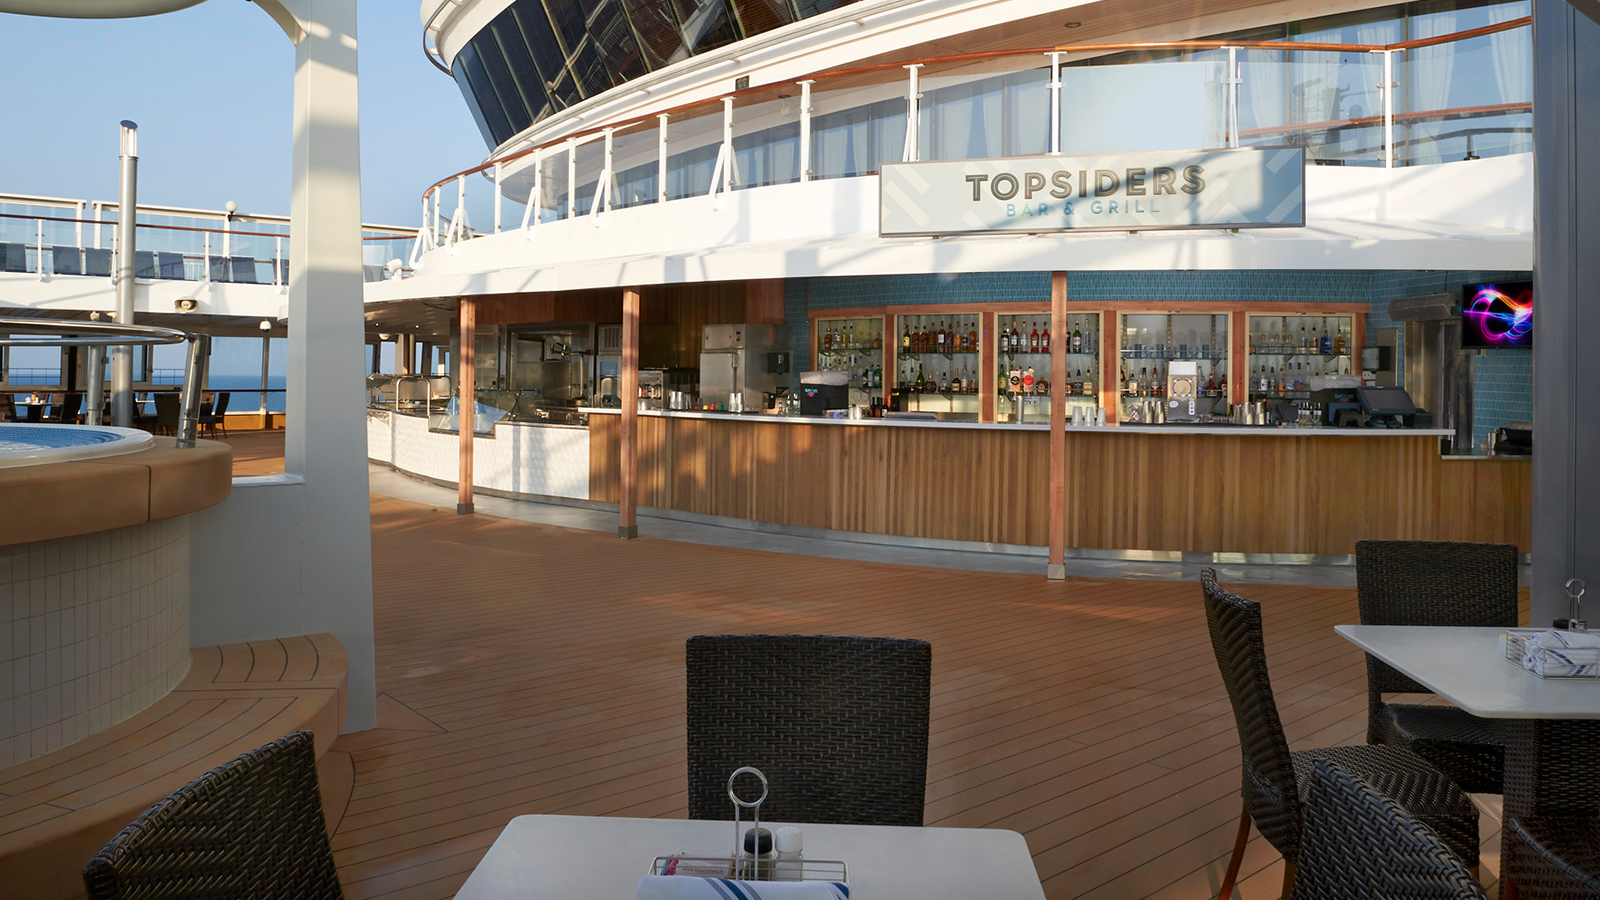 Topsiders Bar & Grill on the Norwegian Gem